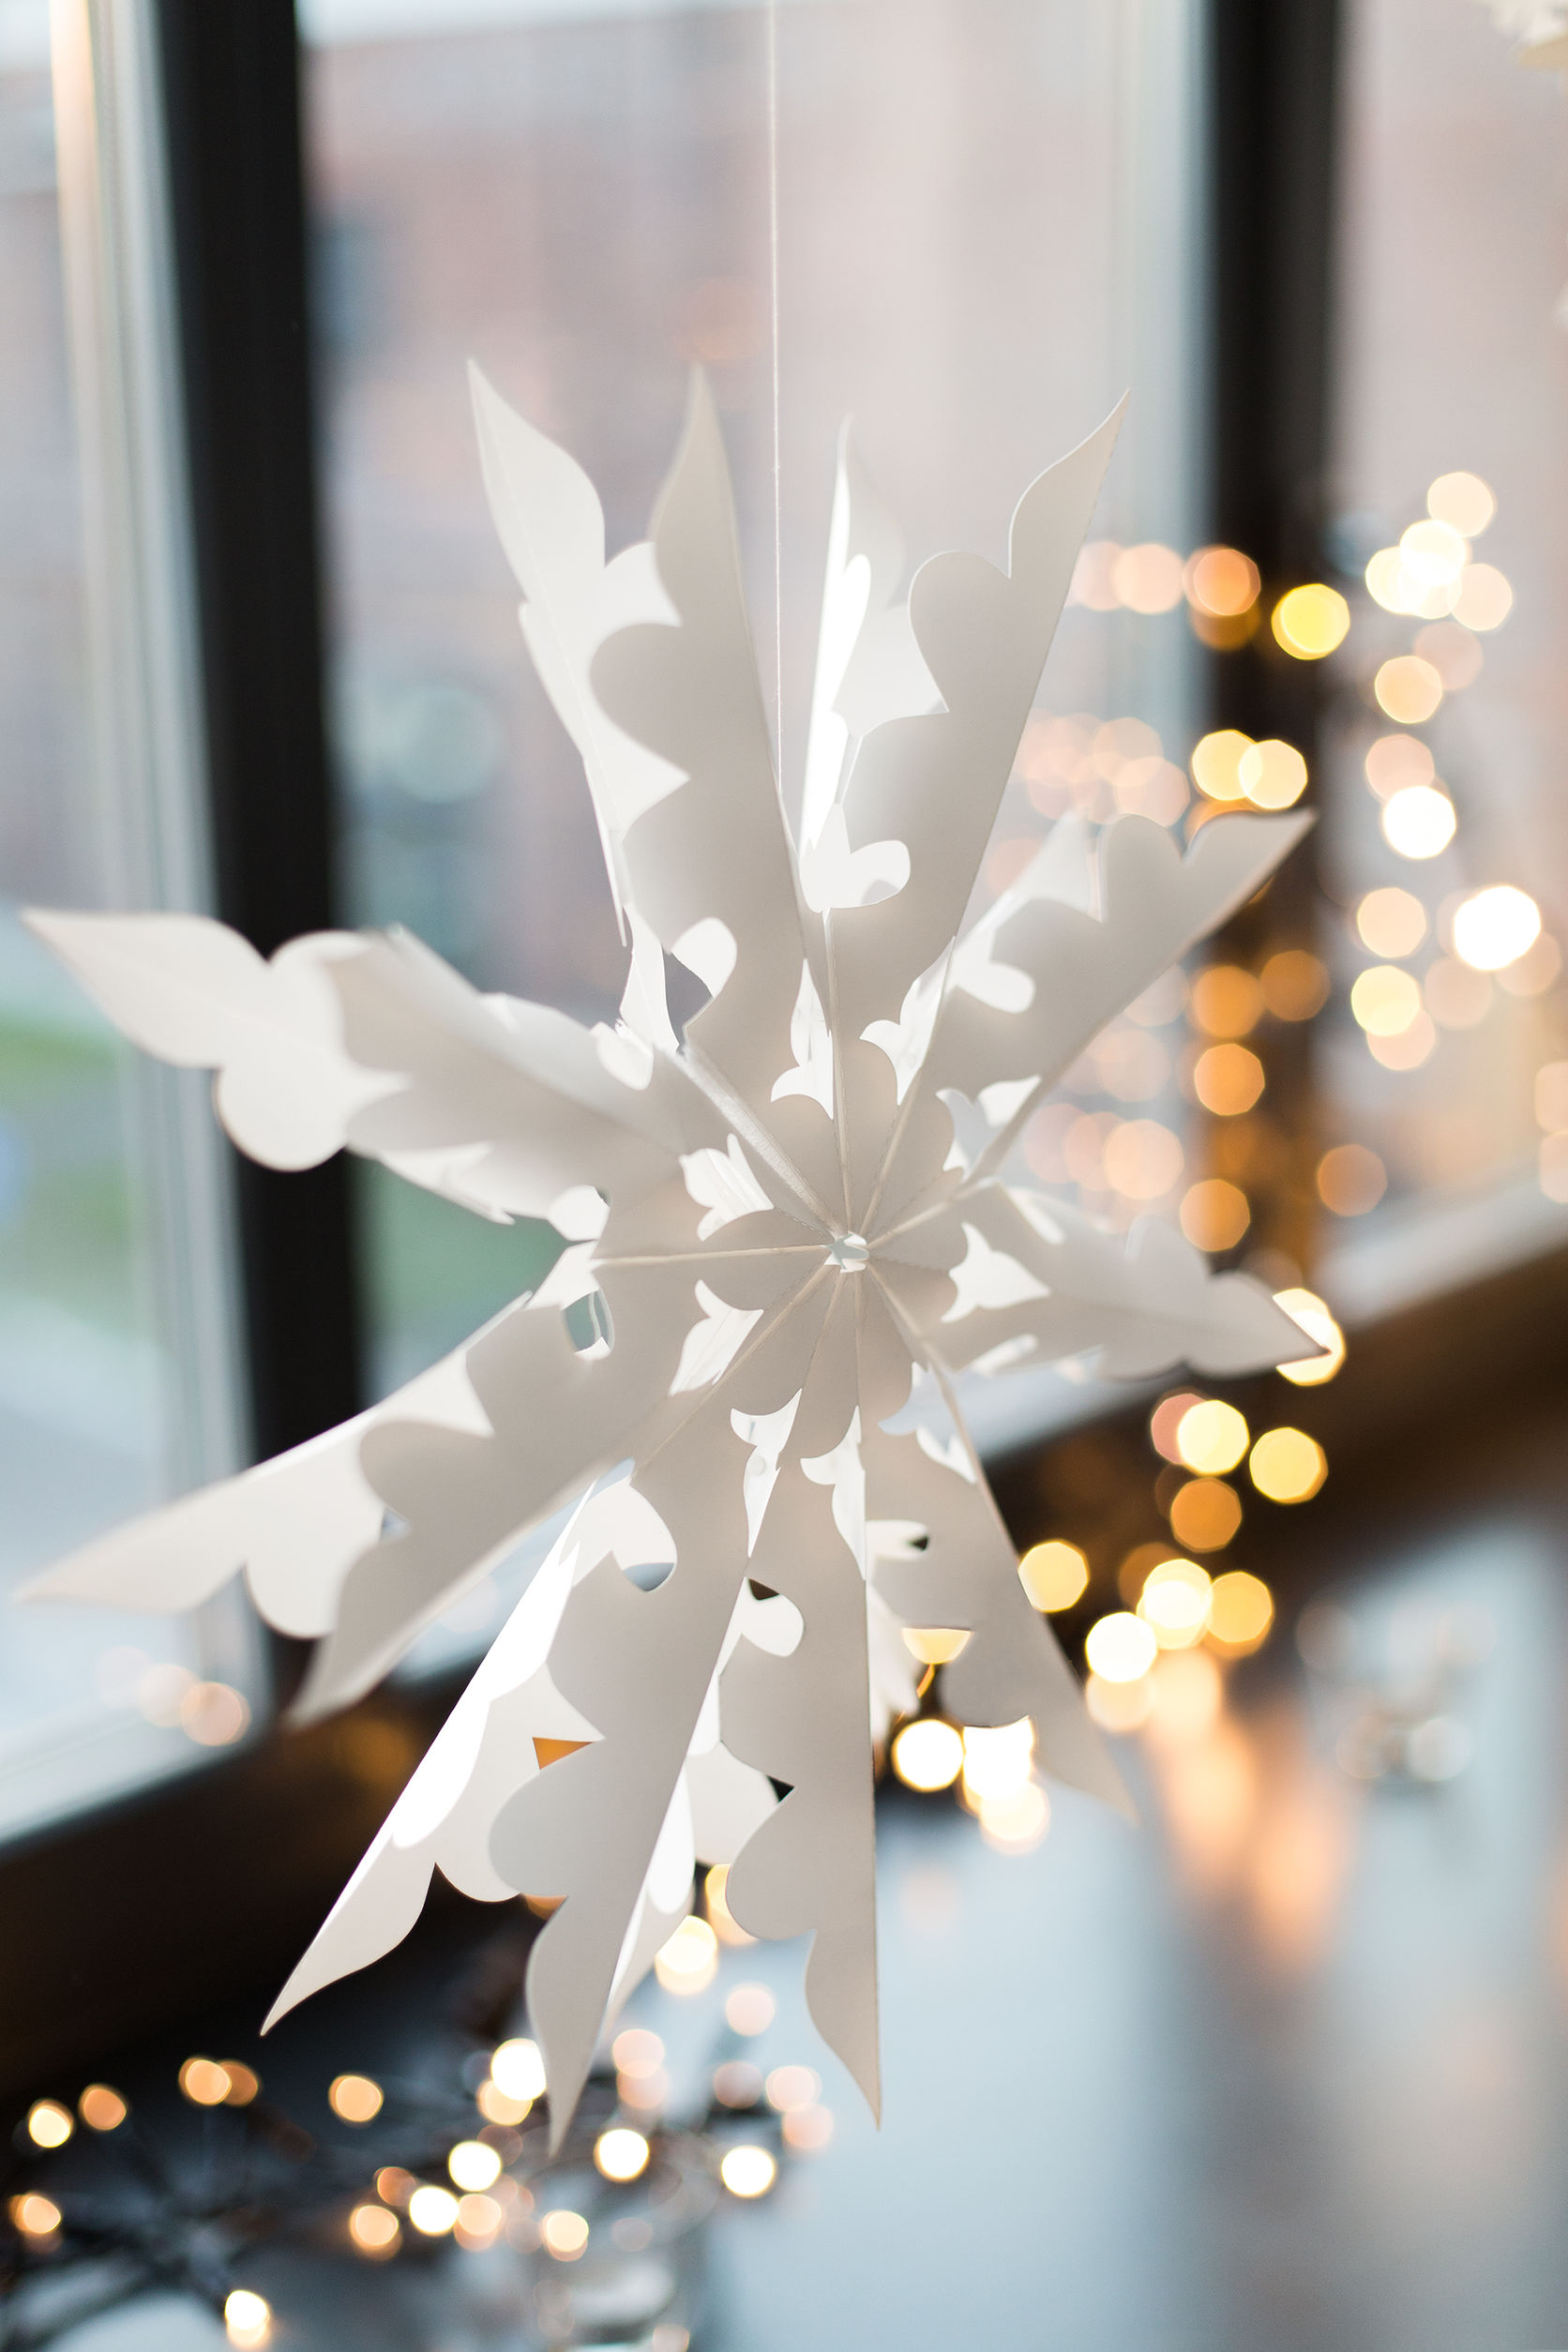 christmas and holidays concept - paper snowflake decoration hanging on window